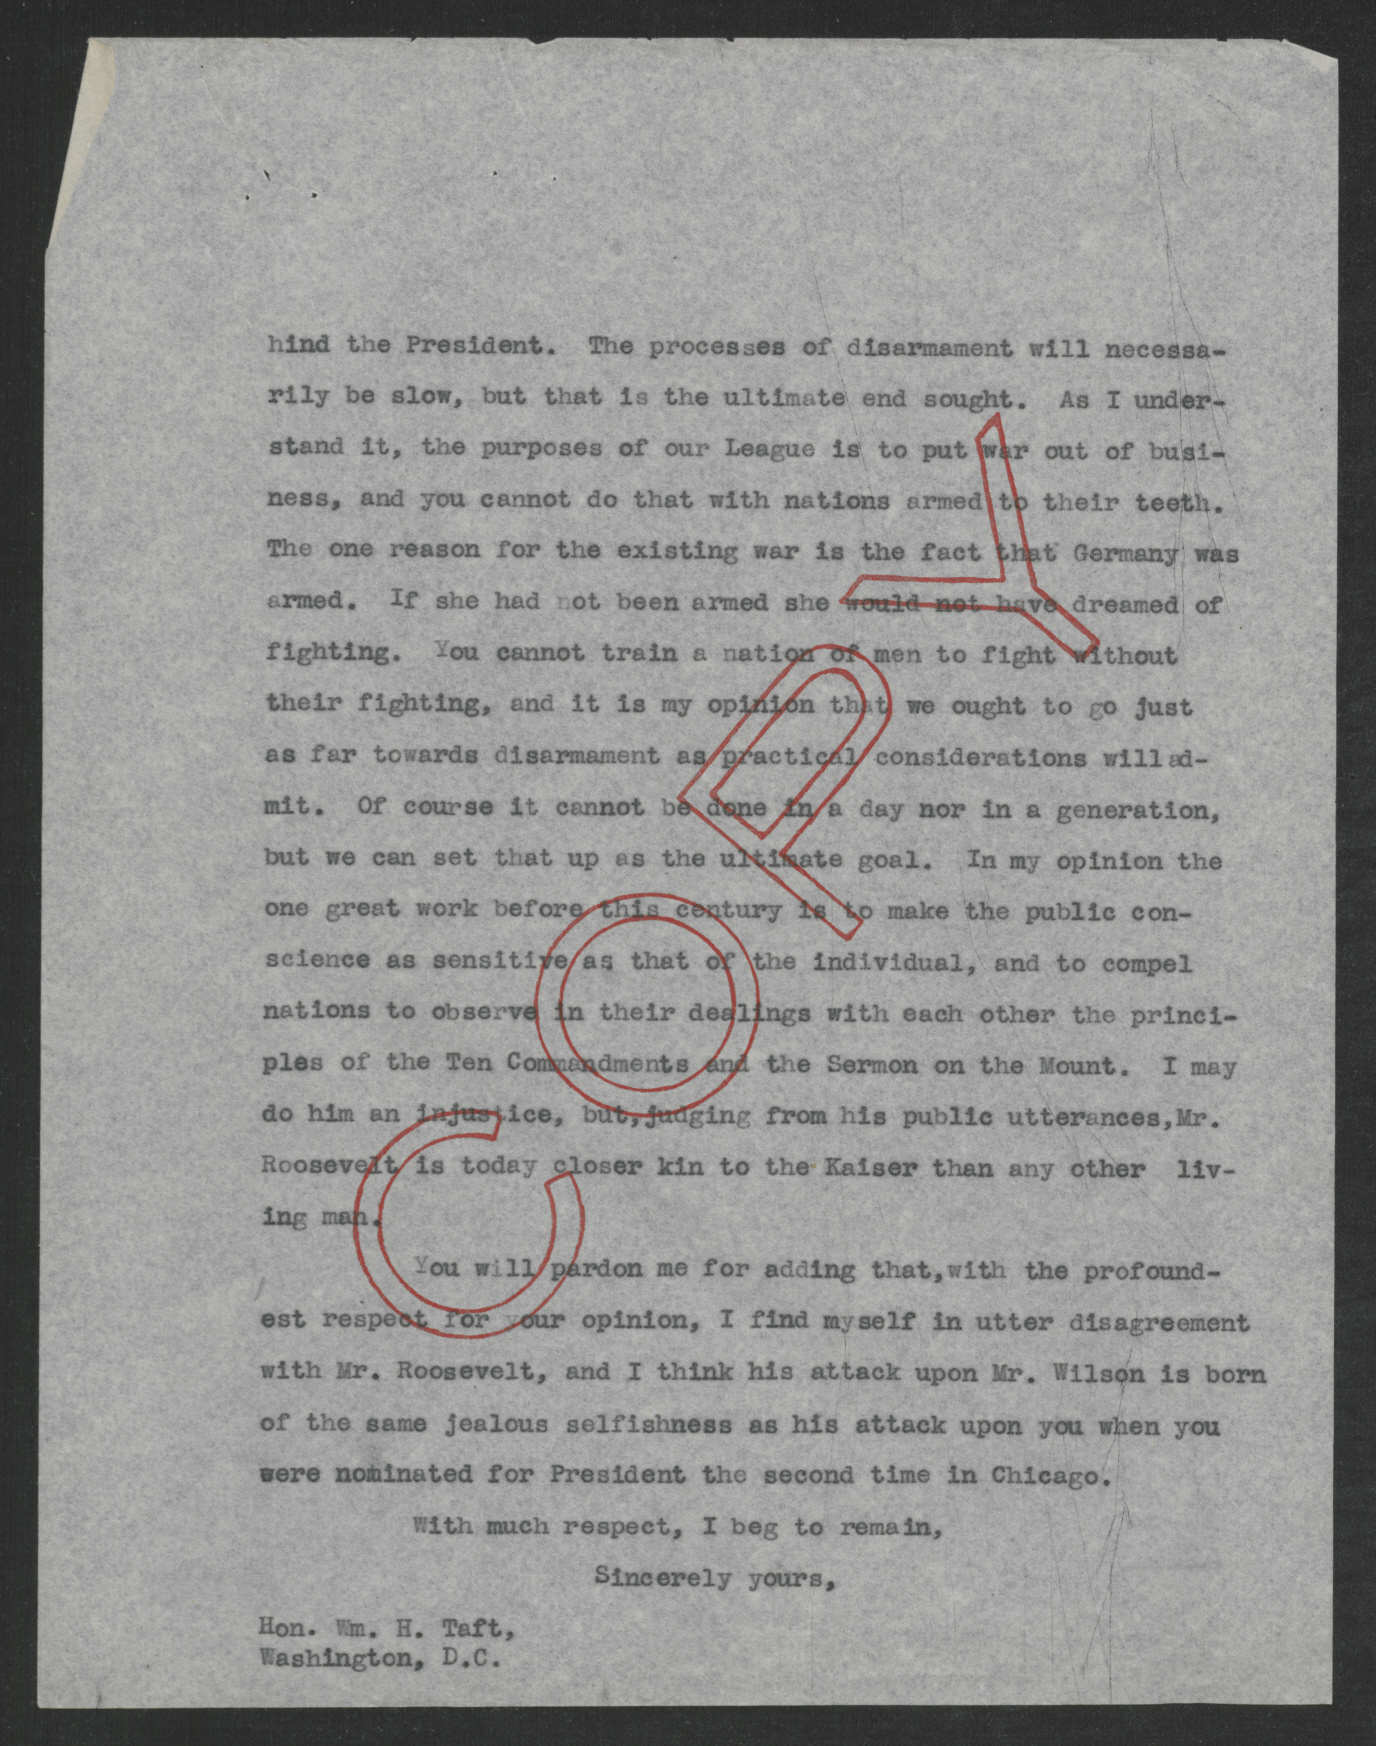 Letter from Thomas W. Bickett to William H. Taft, November 2, 1918, page 2